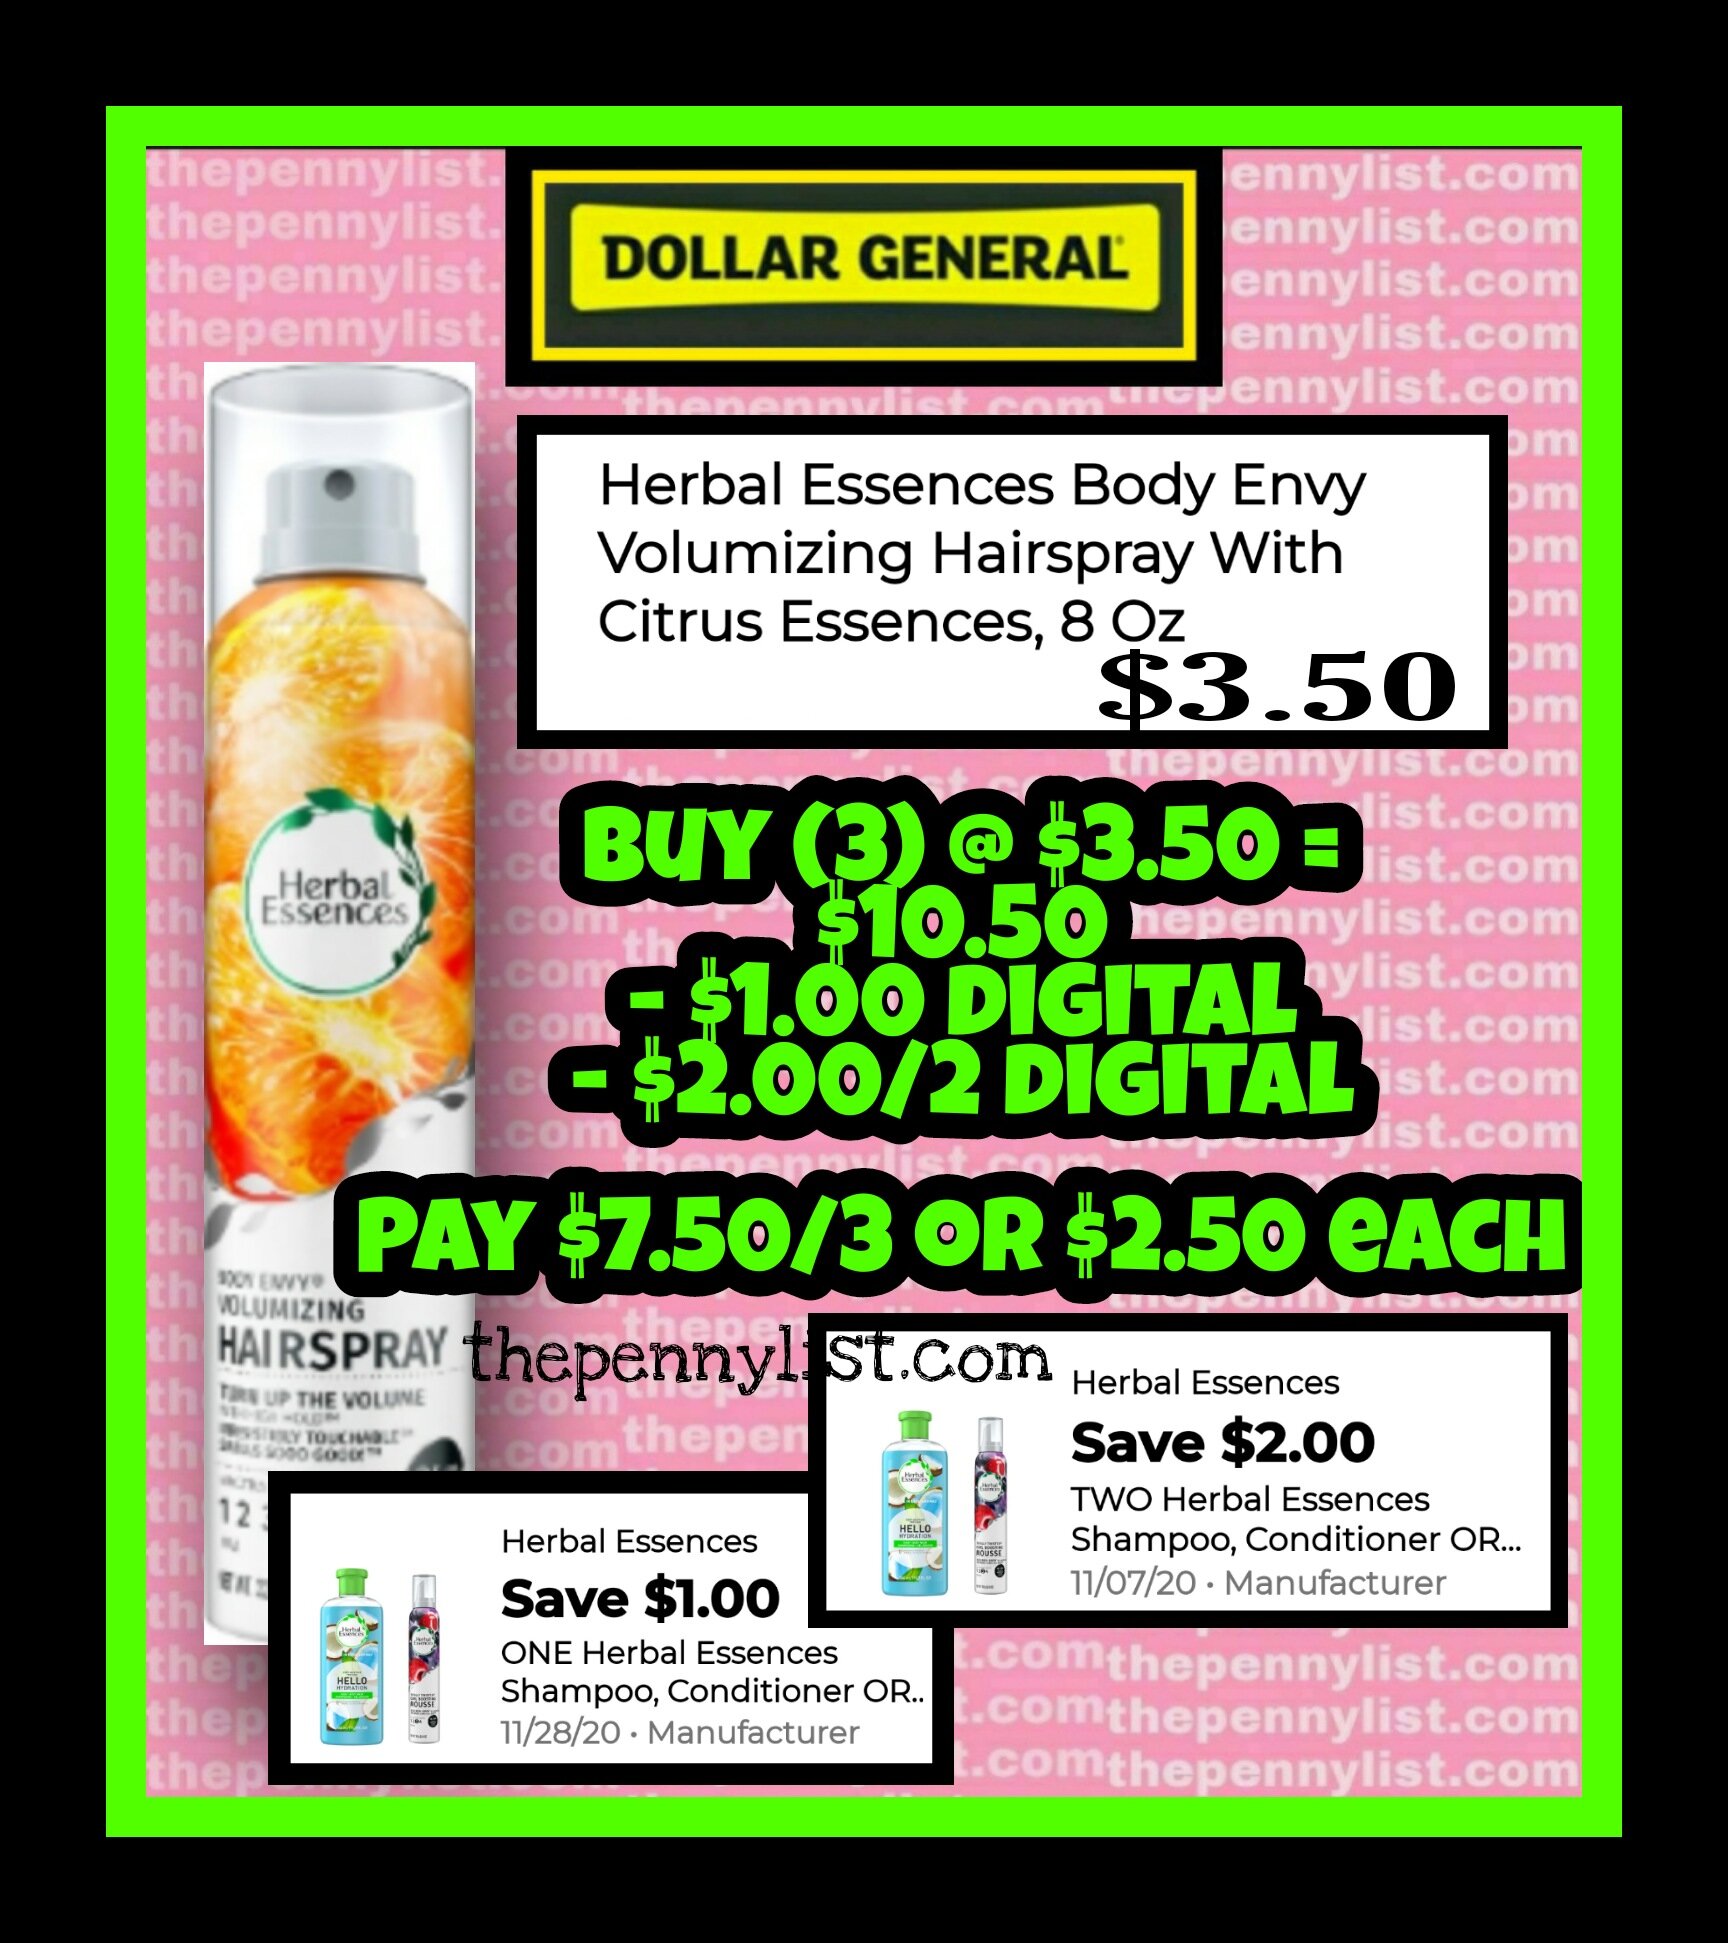 christa coupons — Dollar General Penny List — ThePennyList.com